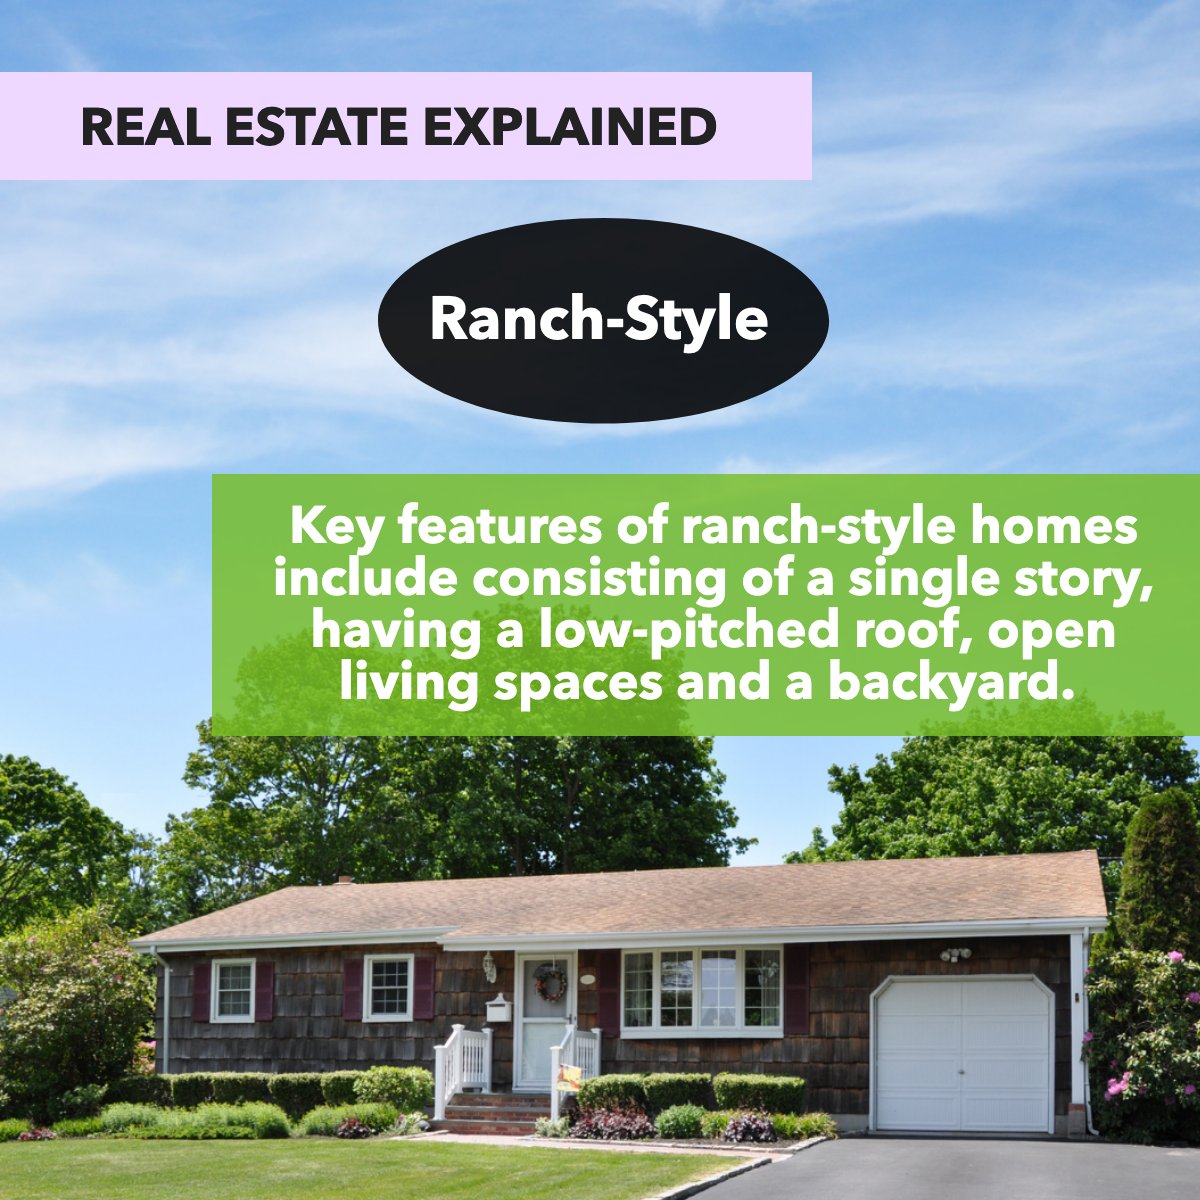 Ranch-style houses are now the most commonly searched-for style of home in the United States. 🏘️

#ranchostyle #ranchhousestyle #ranchstylehomes